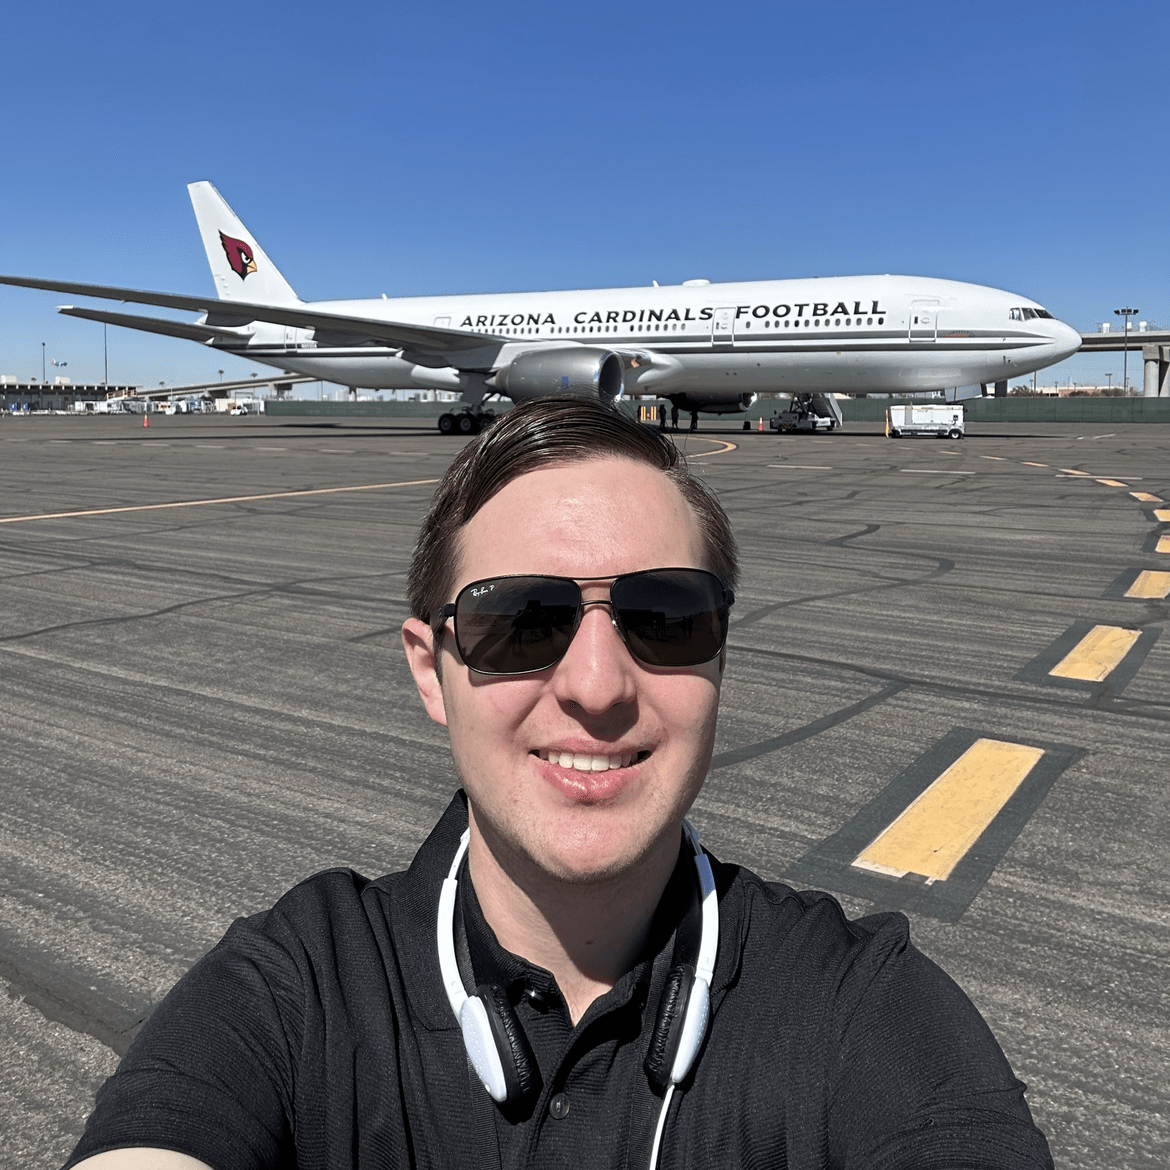 Timothy Gelfer snapped this selfie in front of the Arizona Cardinals’ aircraft on the Phoenix Sky Harbor airport ramp. (Photo: Timothy Gelfer)